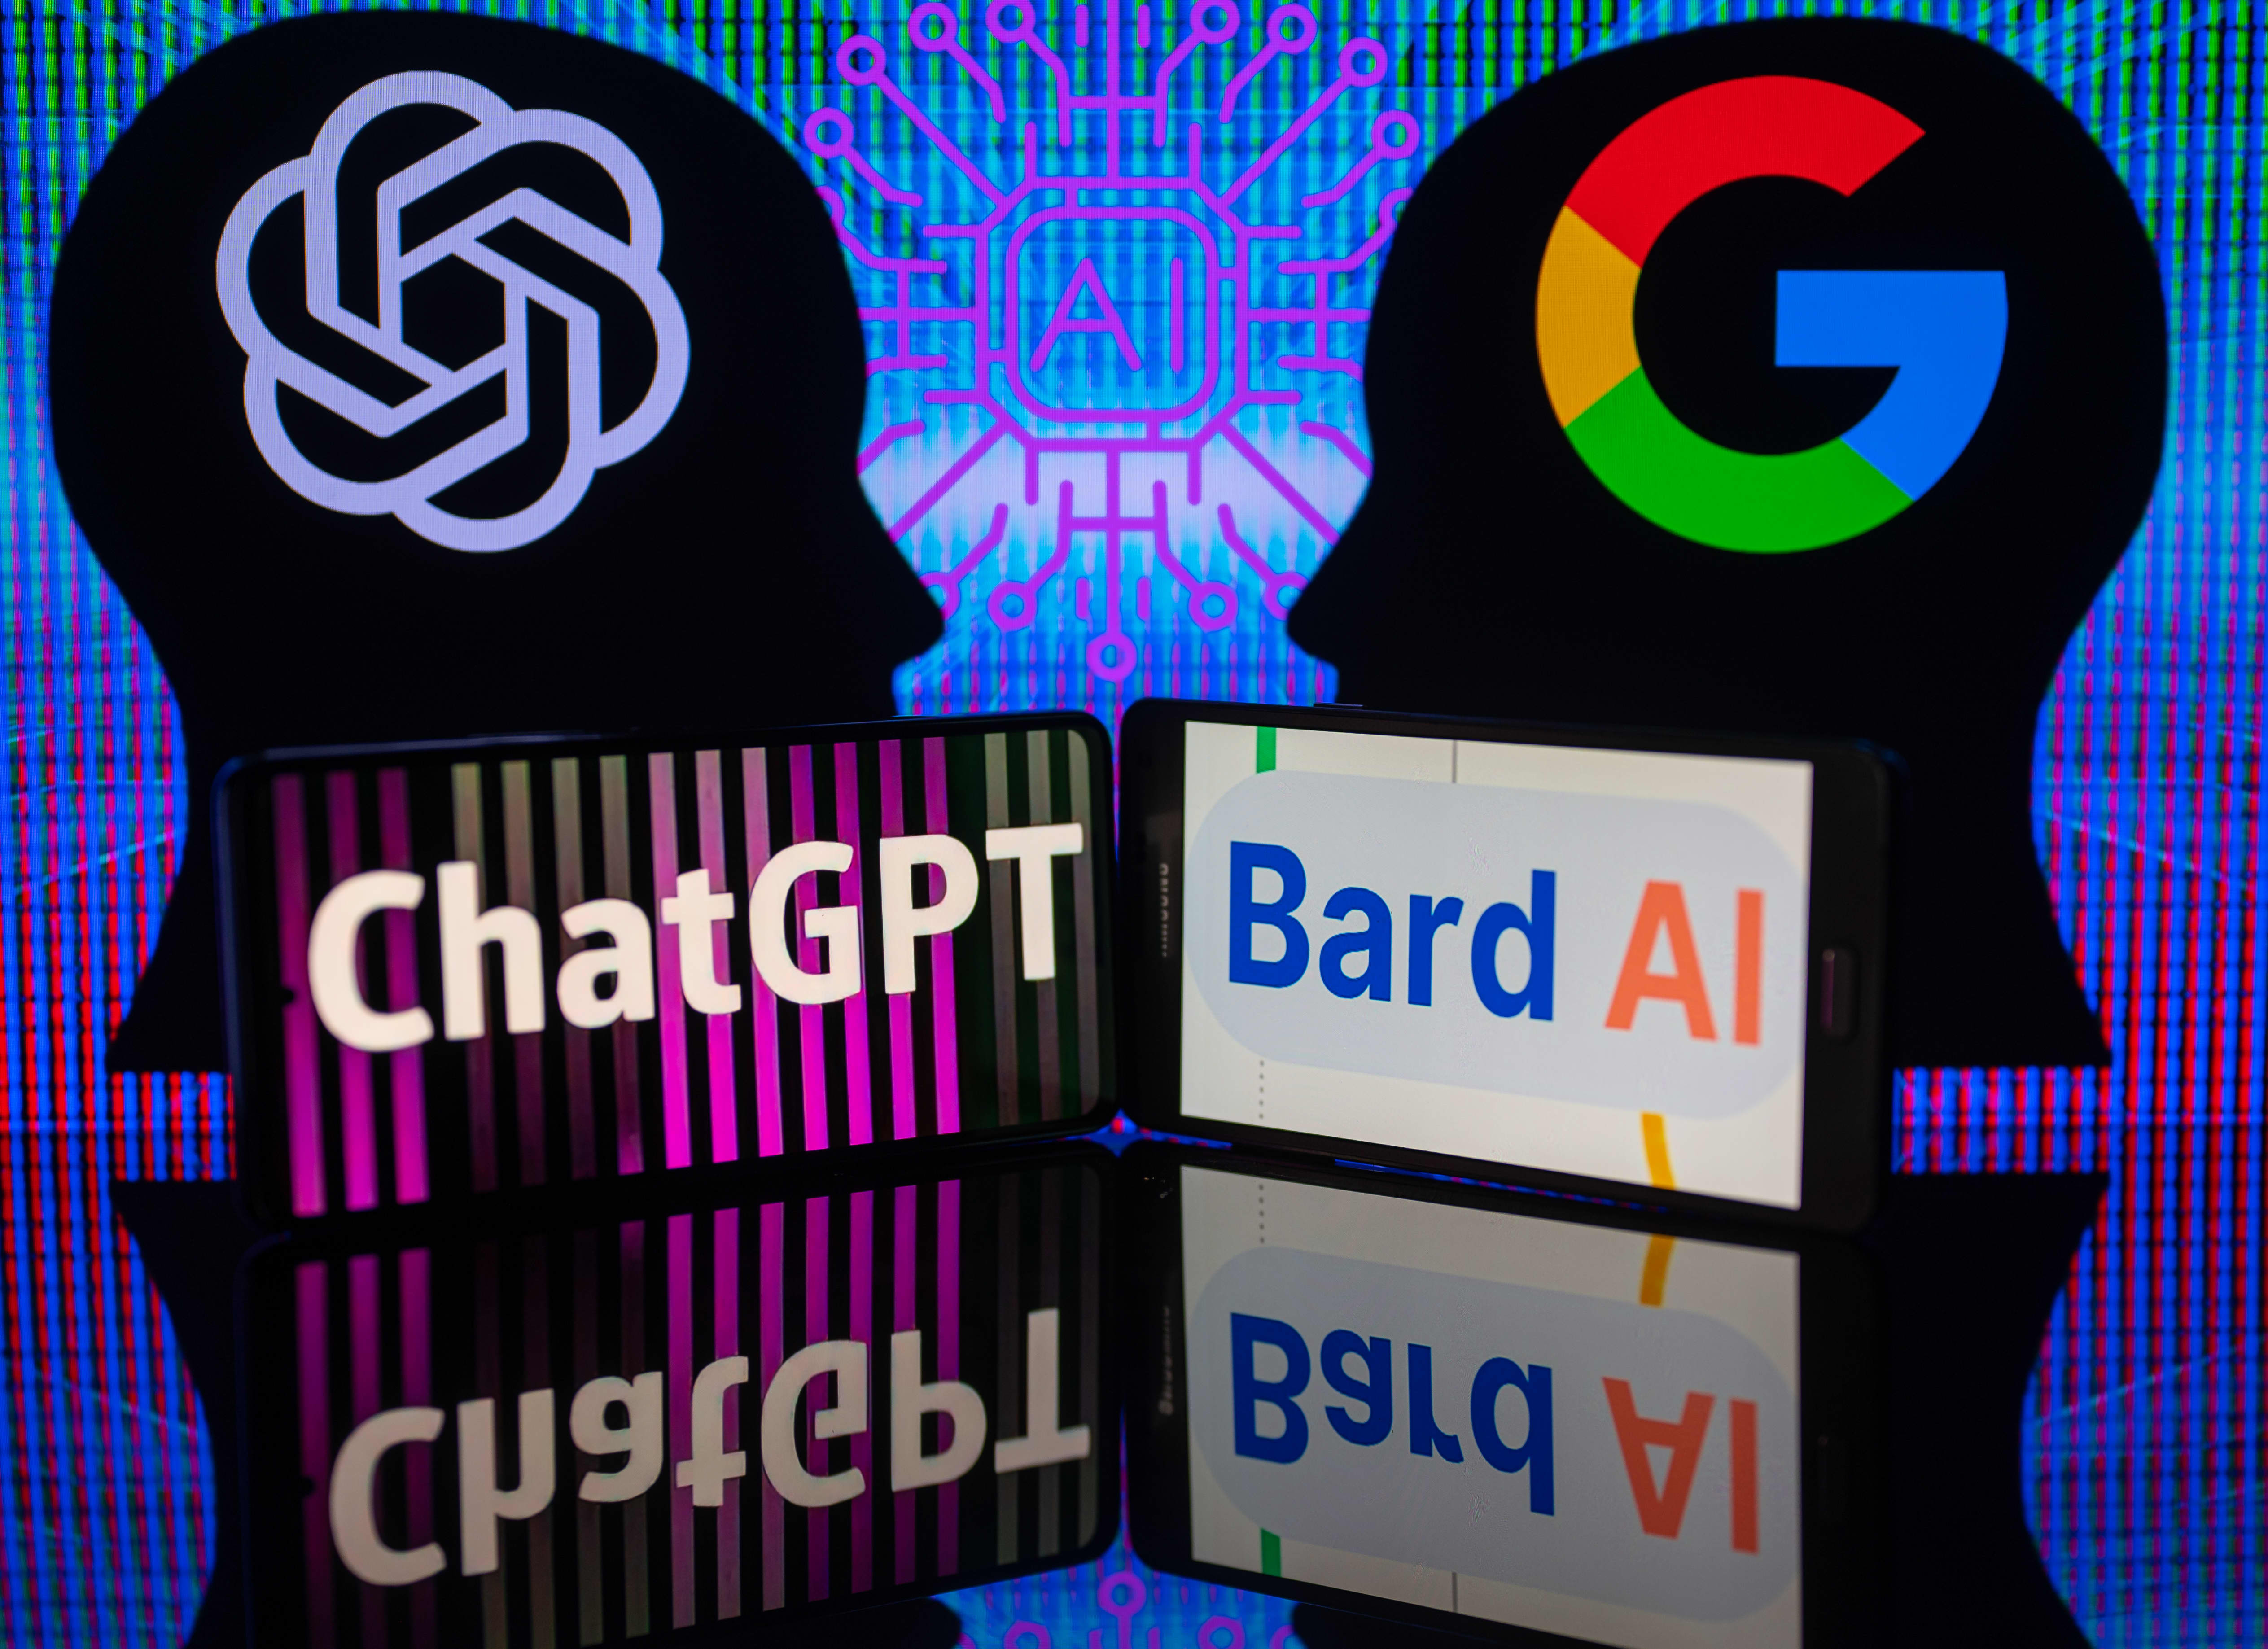 Despite Alphabet's AI event flop — remember, Google dominates search for now. That's what matters